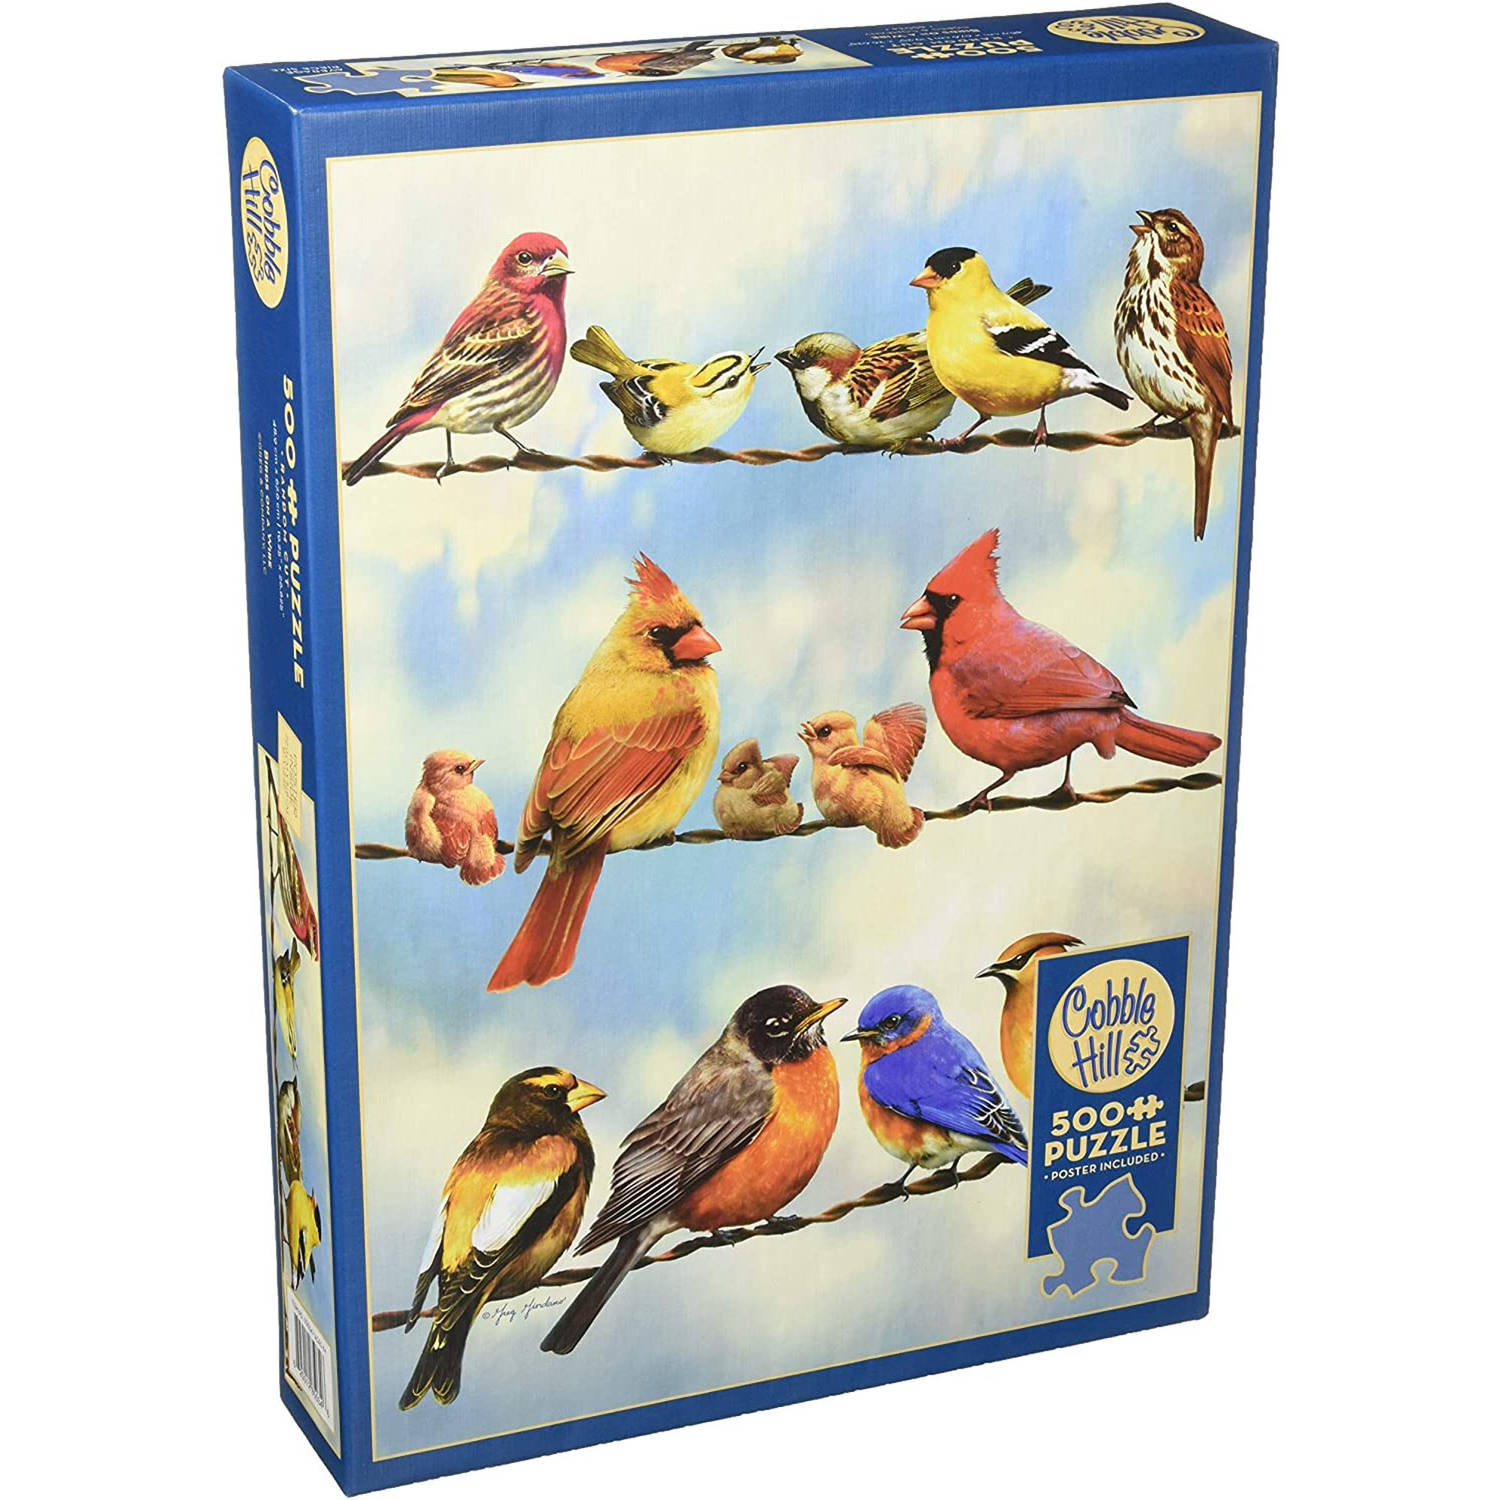 Cobble Hill puzzle 500 pieces - Birds on a wire